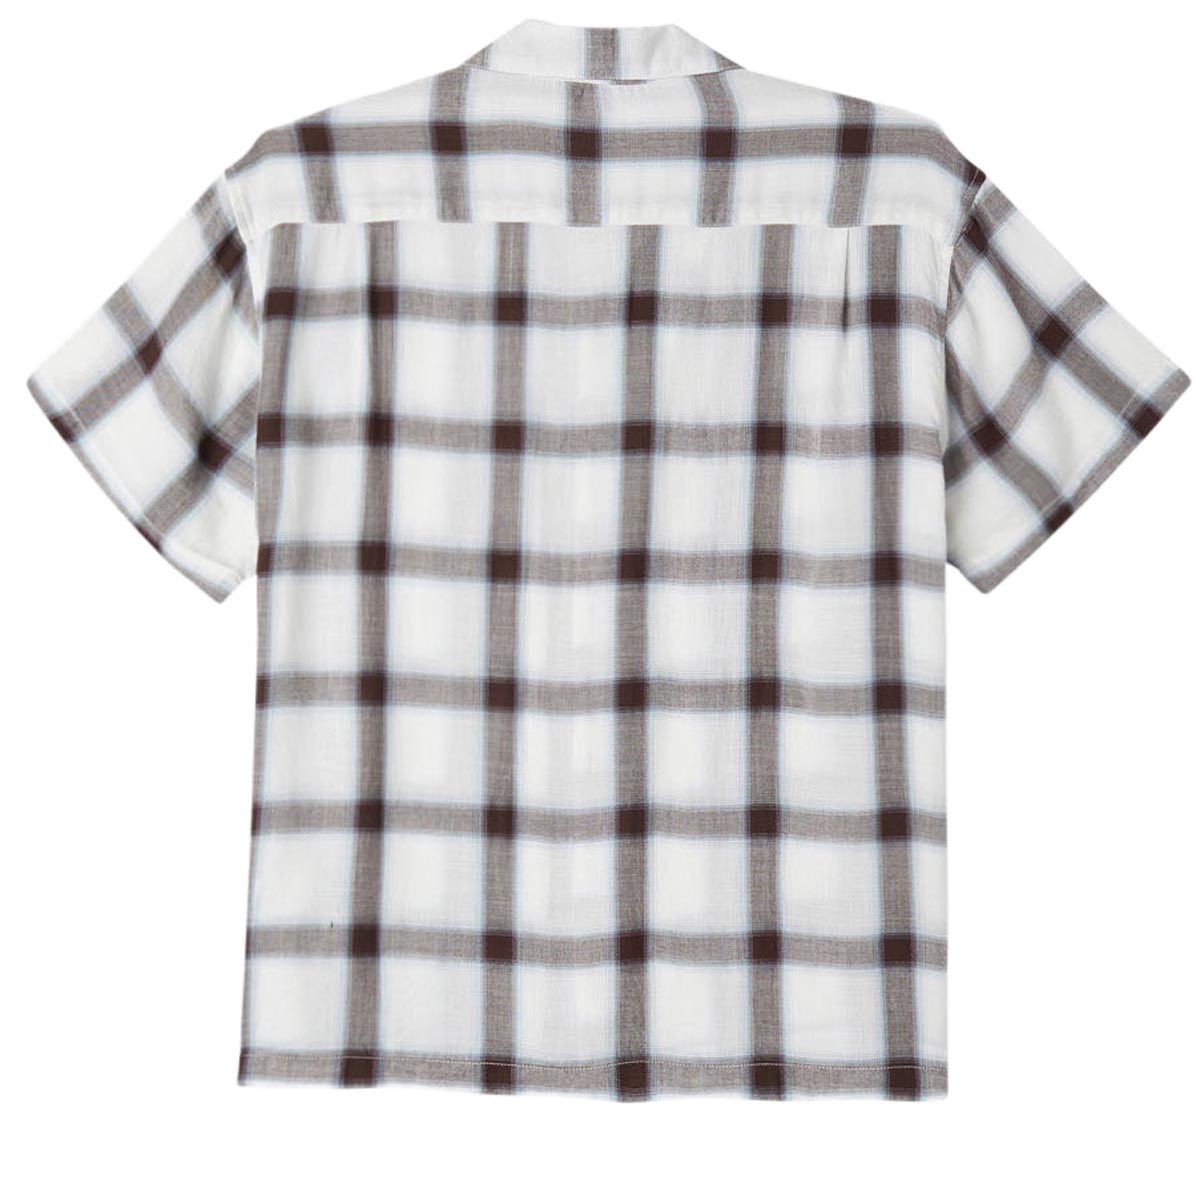 Obey Ambient Woven Shirt - Unbleached Multi image 2